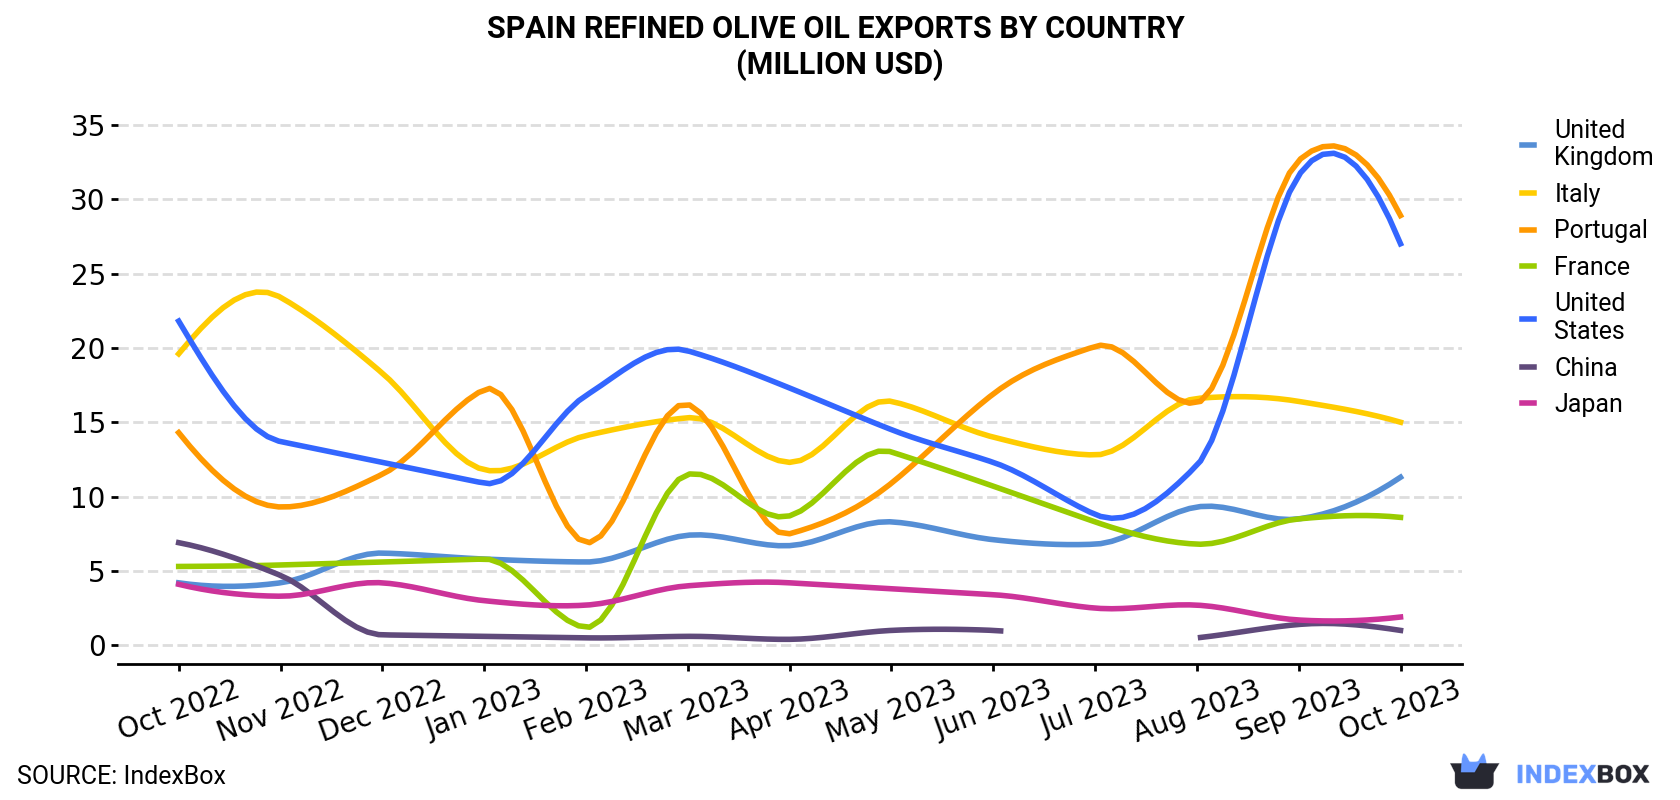 Spain Refined Olive Oil Exports By Country (Million USD)